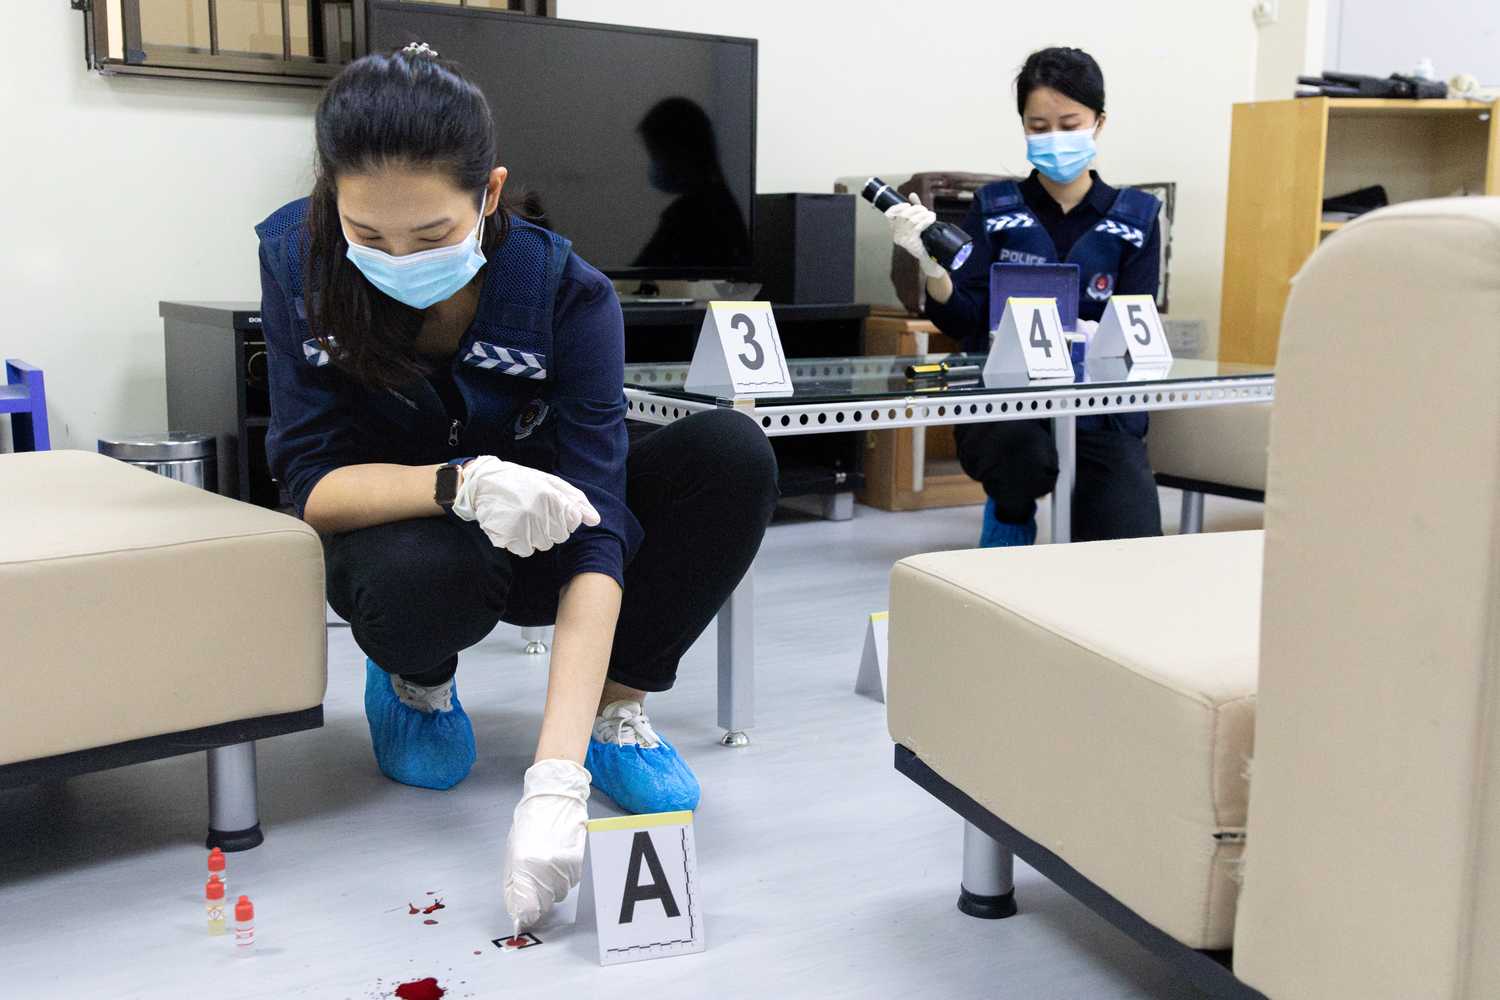 Two Forensic Specialists squatting at a mock crime scene. The first Forensic Specialist in the foreground is picking up blood stains on the floor with a cotton bud for further testing and the second Forensic Specialist in the background is shining a Forensic Light Source containing UV light on some artefacts.